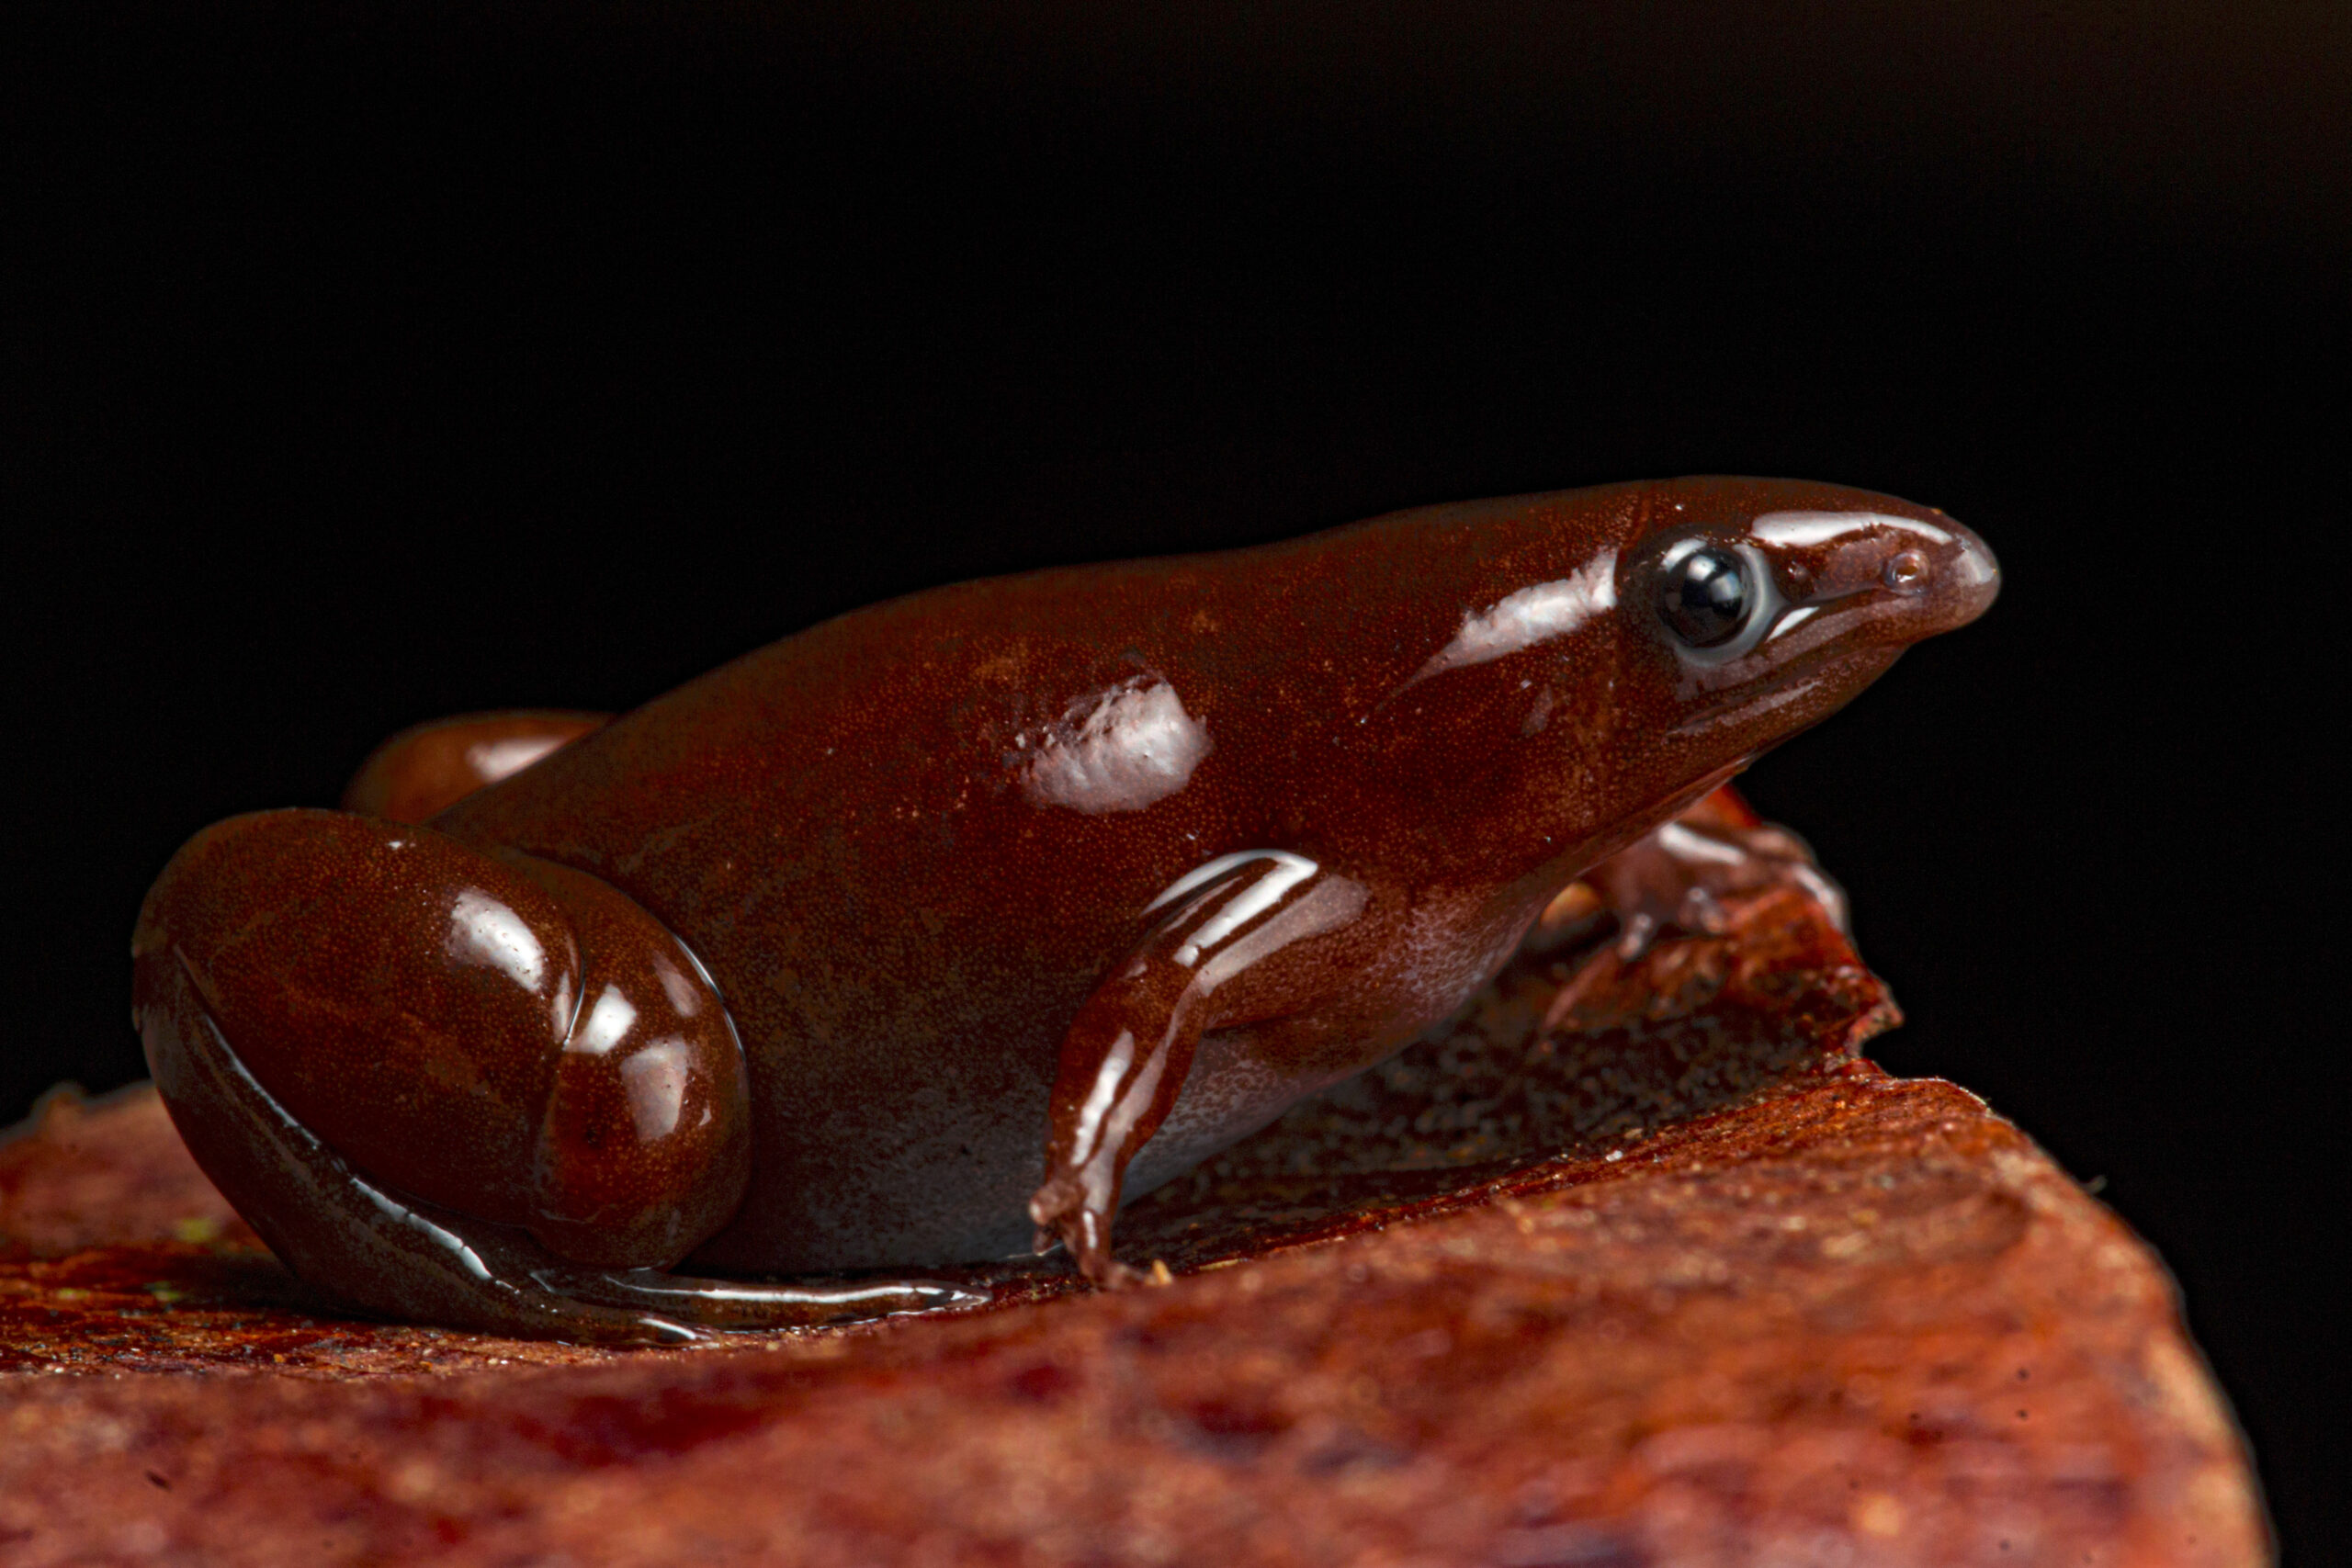 a dark brown frog with a longer cone shaped nose and large round eyes